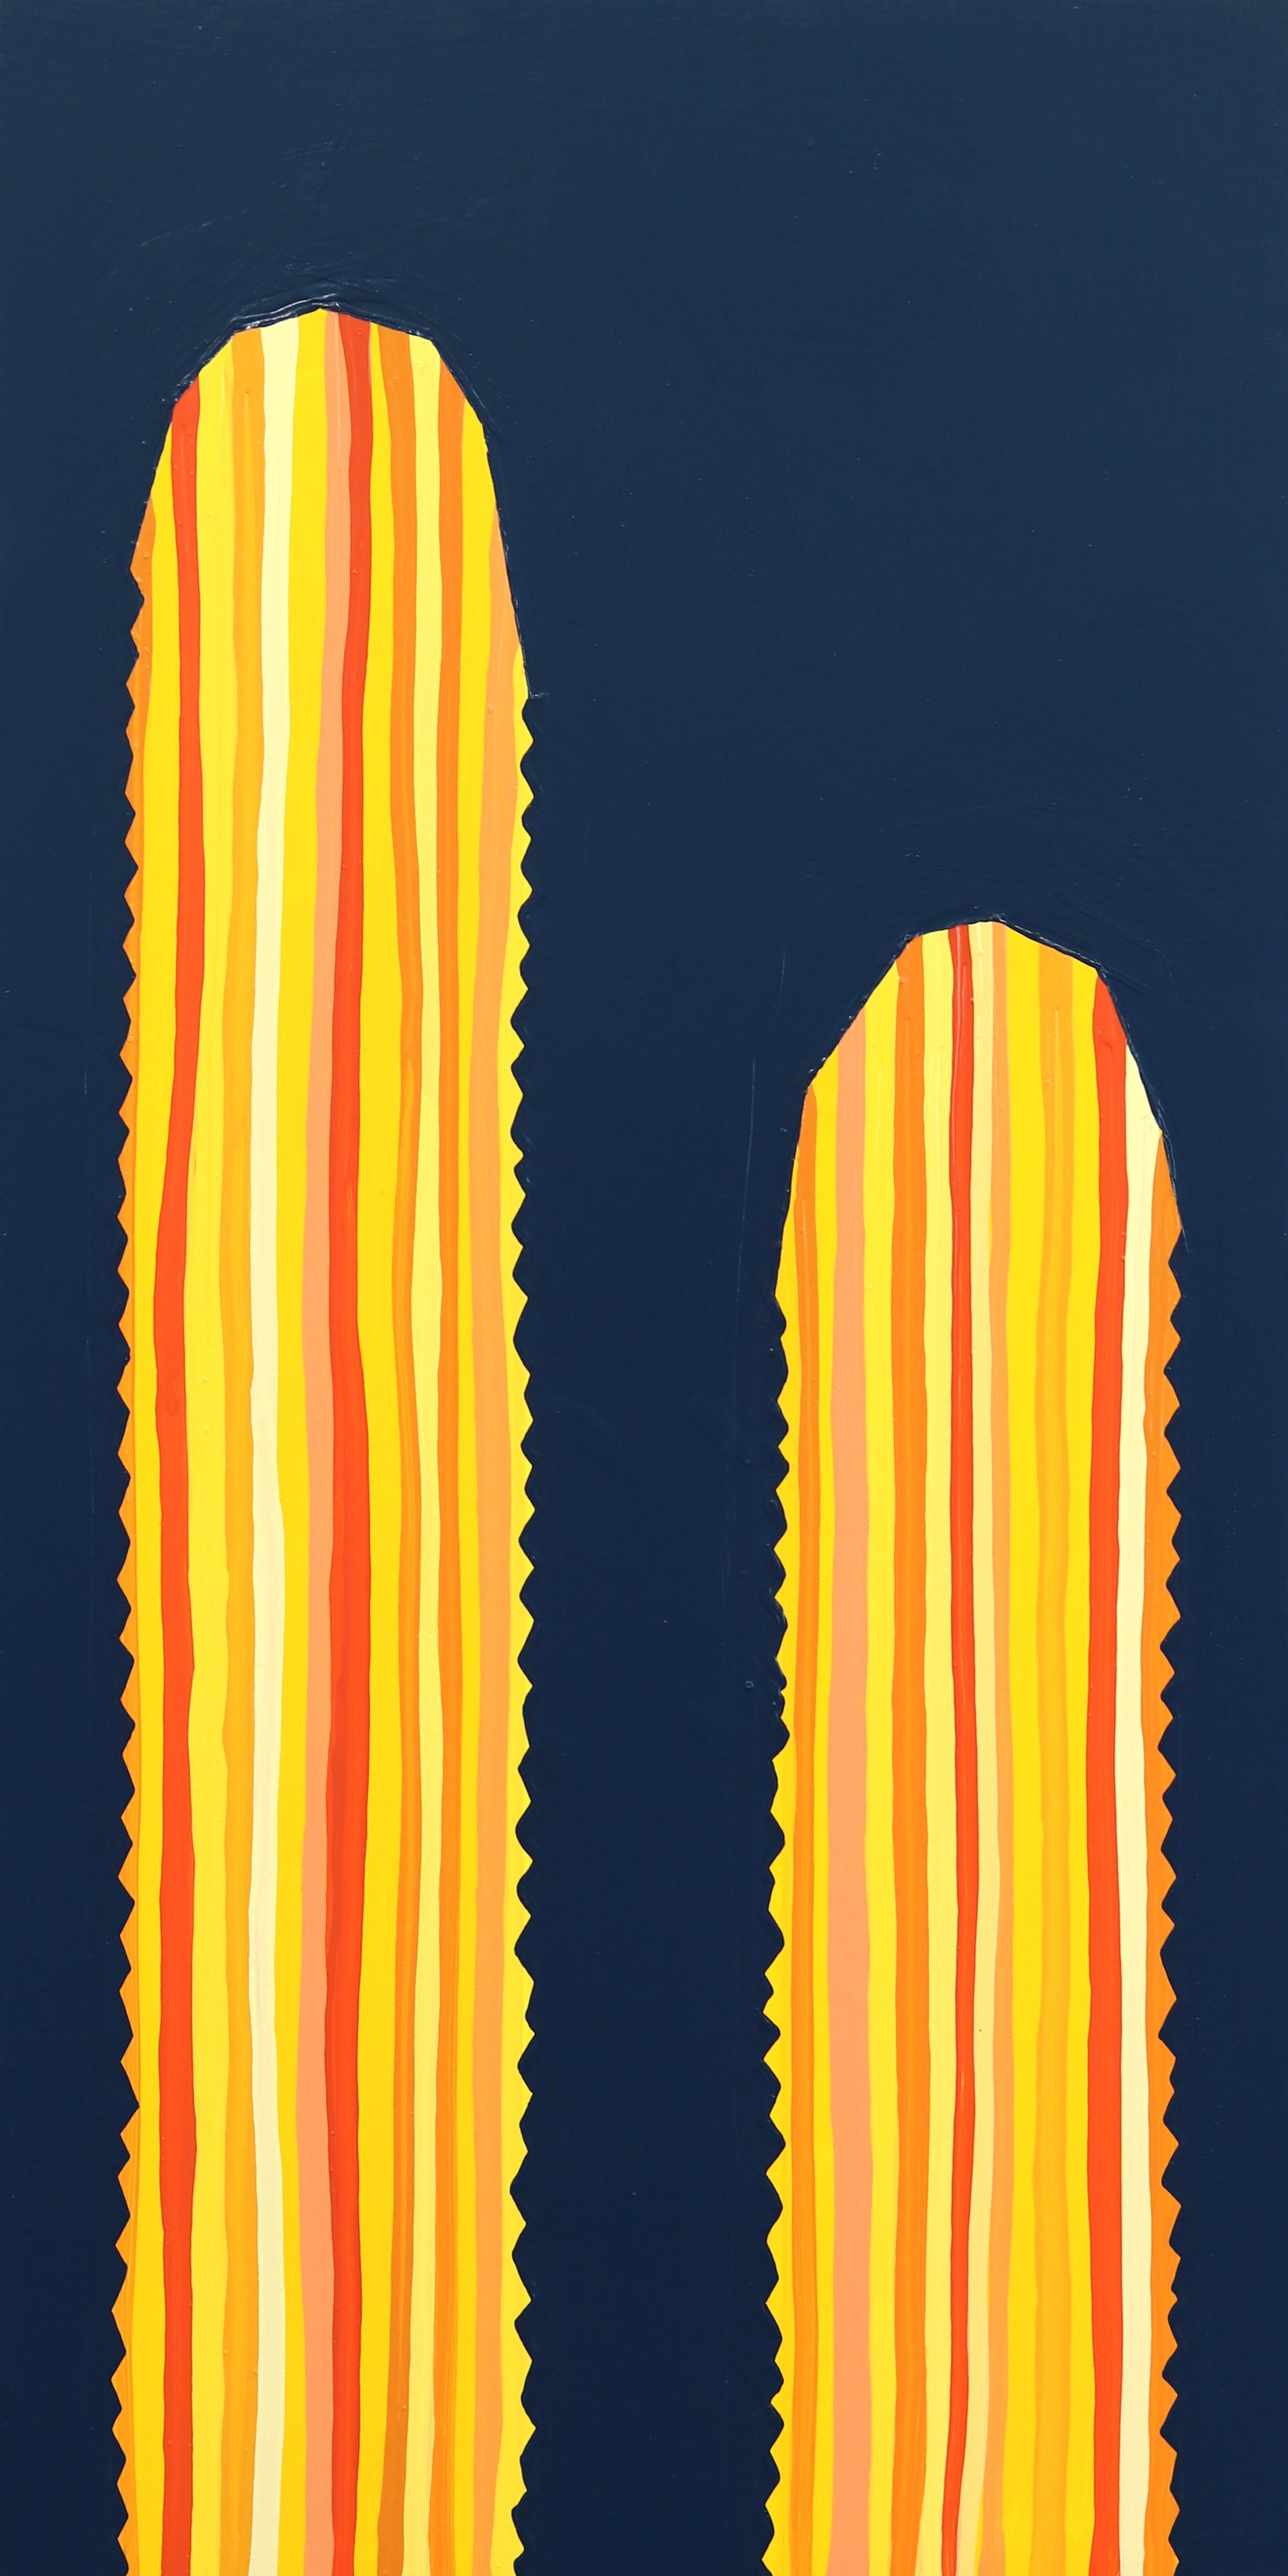 Will Beger Figurative Painting - Illuminate - Vibrant Yellow and Blue Southwest Inspired Pop Art Cactus Painting